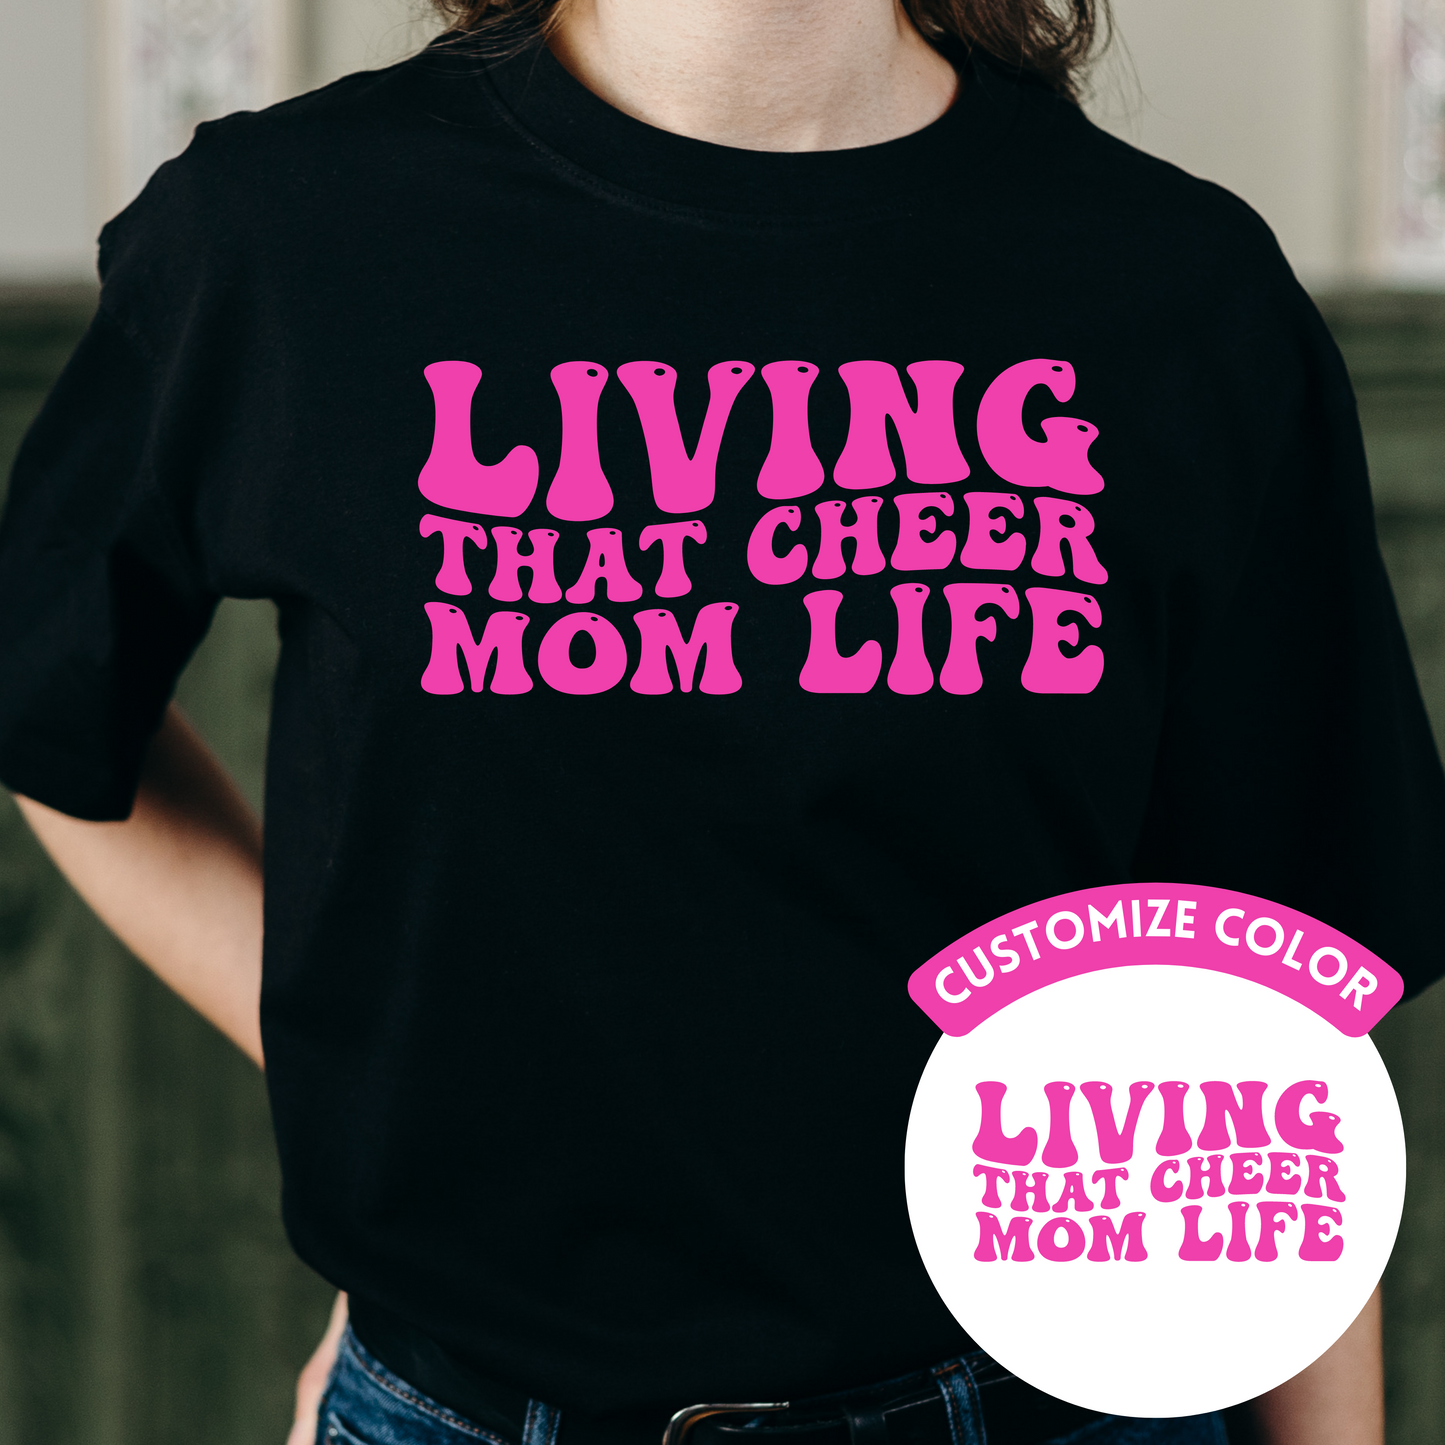 Living that Cheer Mom Life | Customize Color